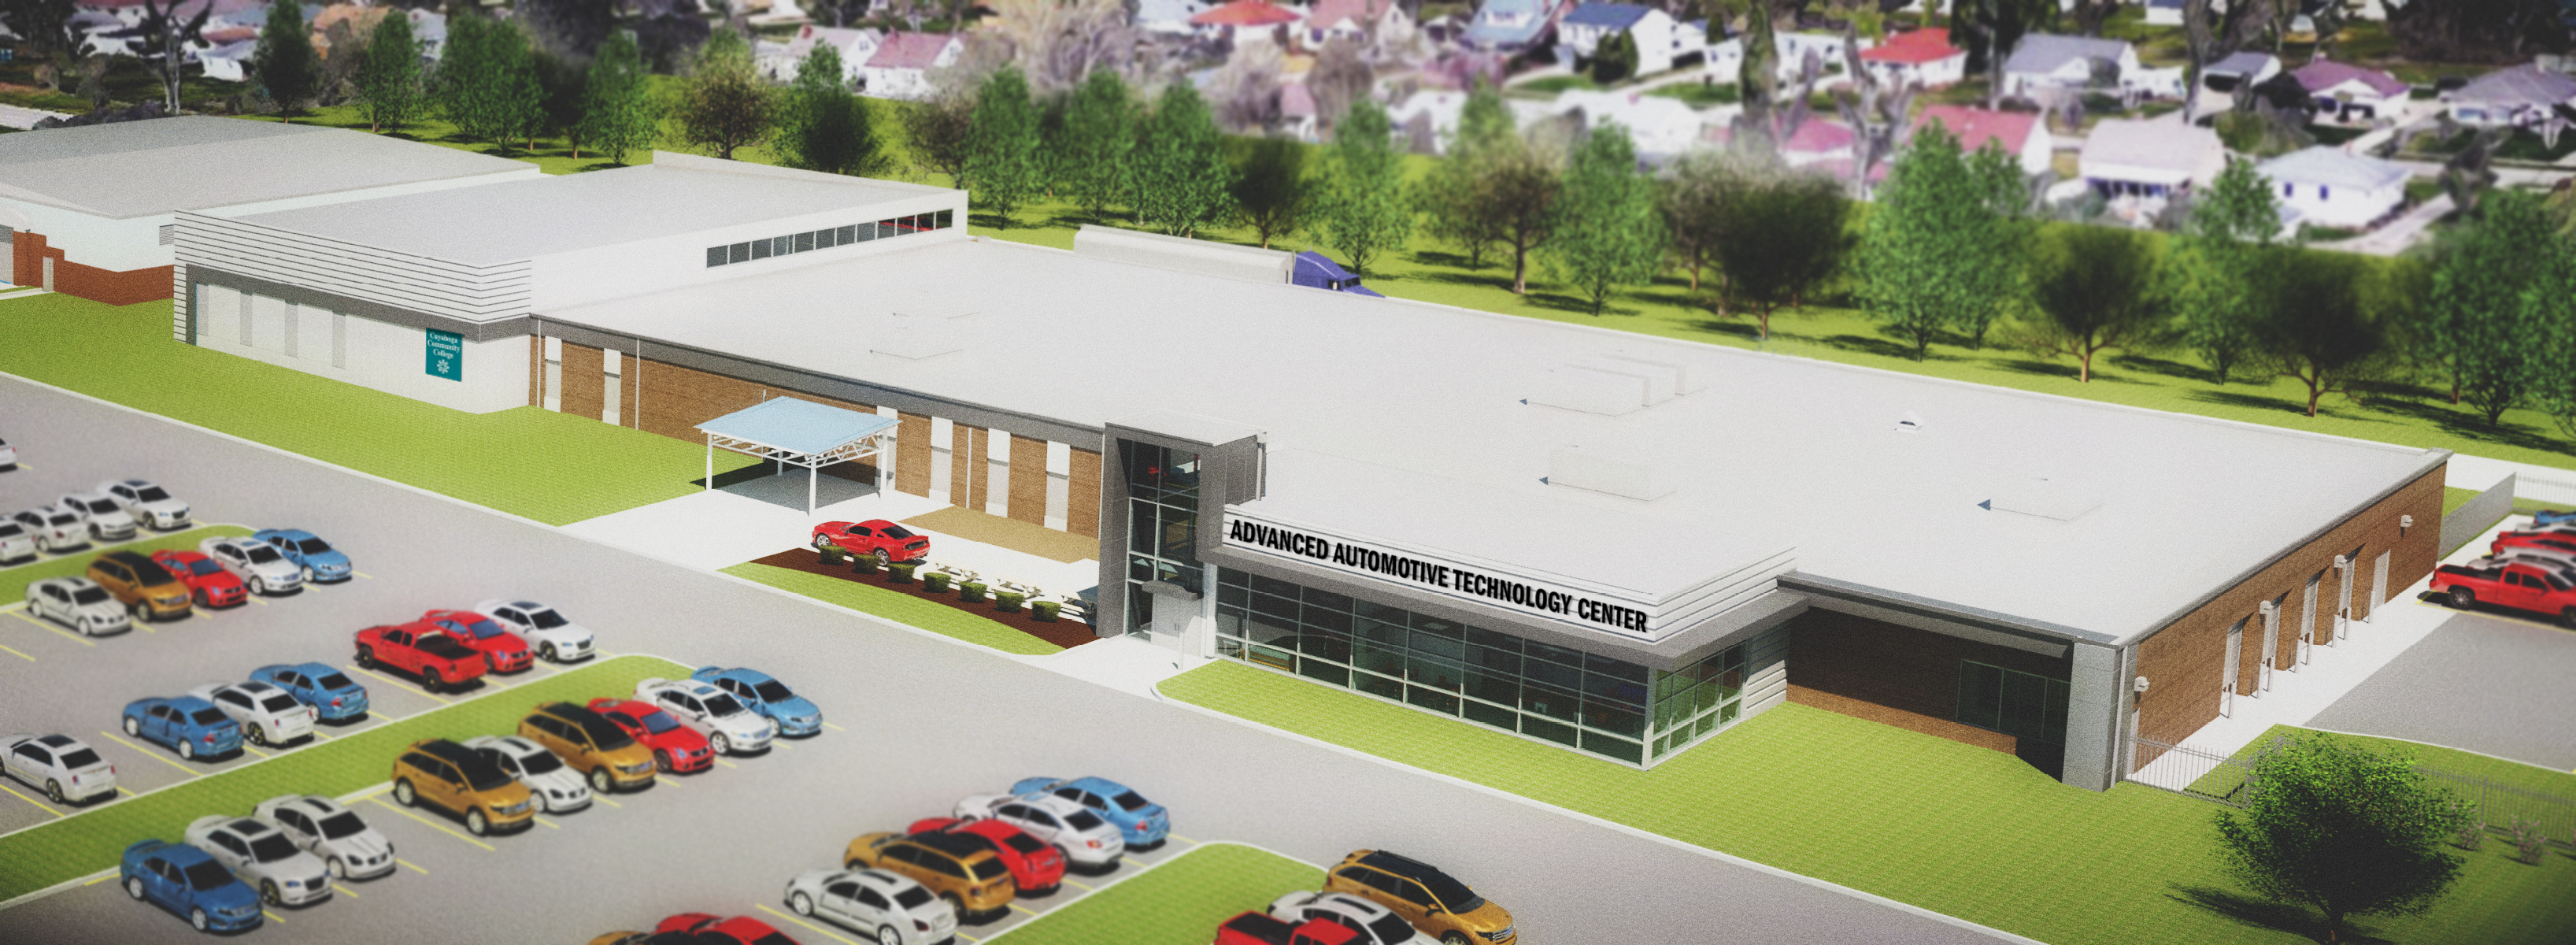 Rendering of the Advanced Automotive Technology Center